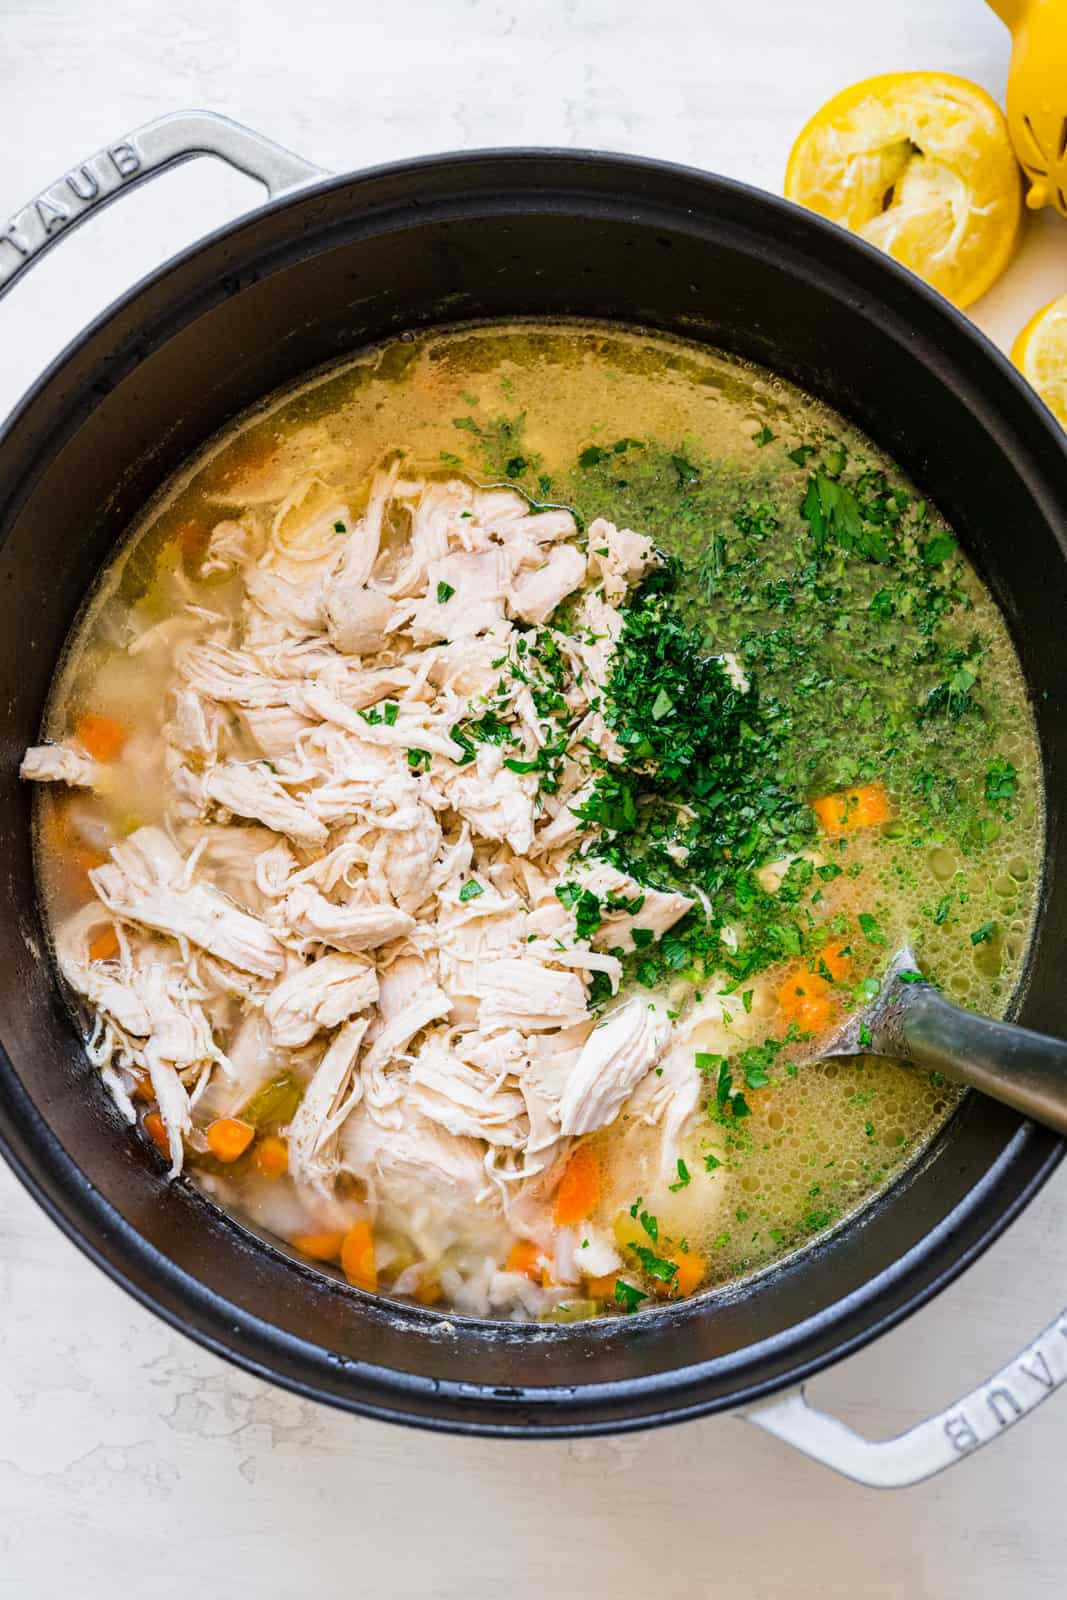 sliced chicken, parsley and dill added to stock pot.